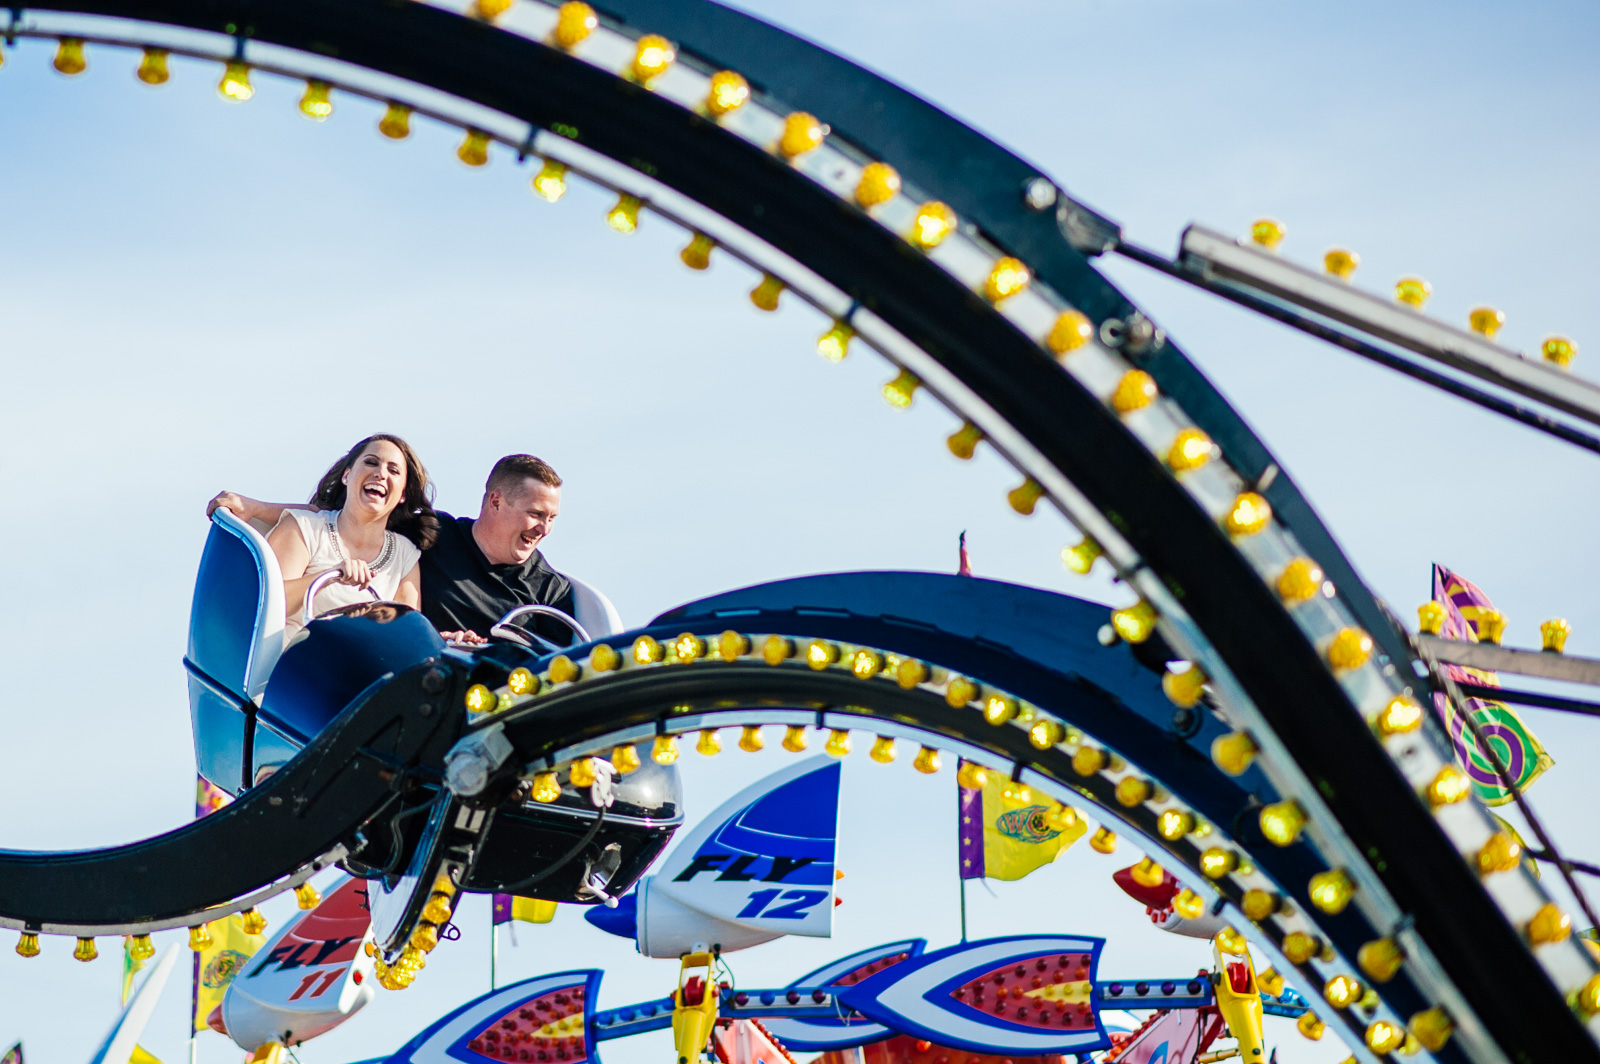  ^ “Finishing on a (up-) high note.” Tanya and John were arguably our most goofy couple. &nbsp;In lieu of cuddly and kissy photos, they wanted a fun-loving carnival engagement session that really highlighted their love of laughter. &nbsp;We were tota